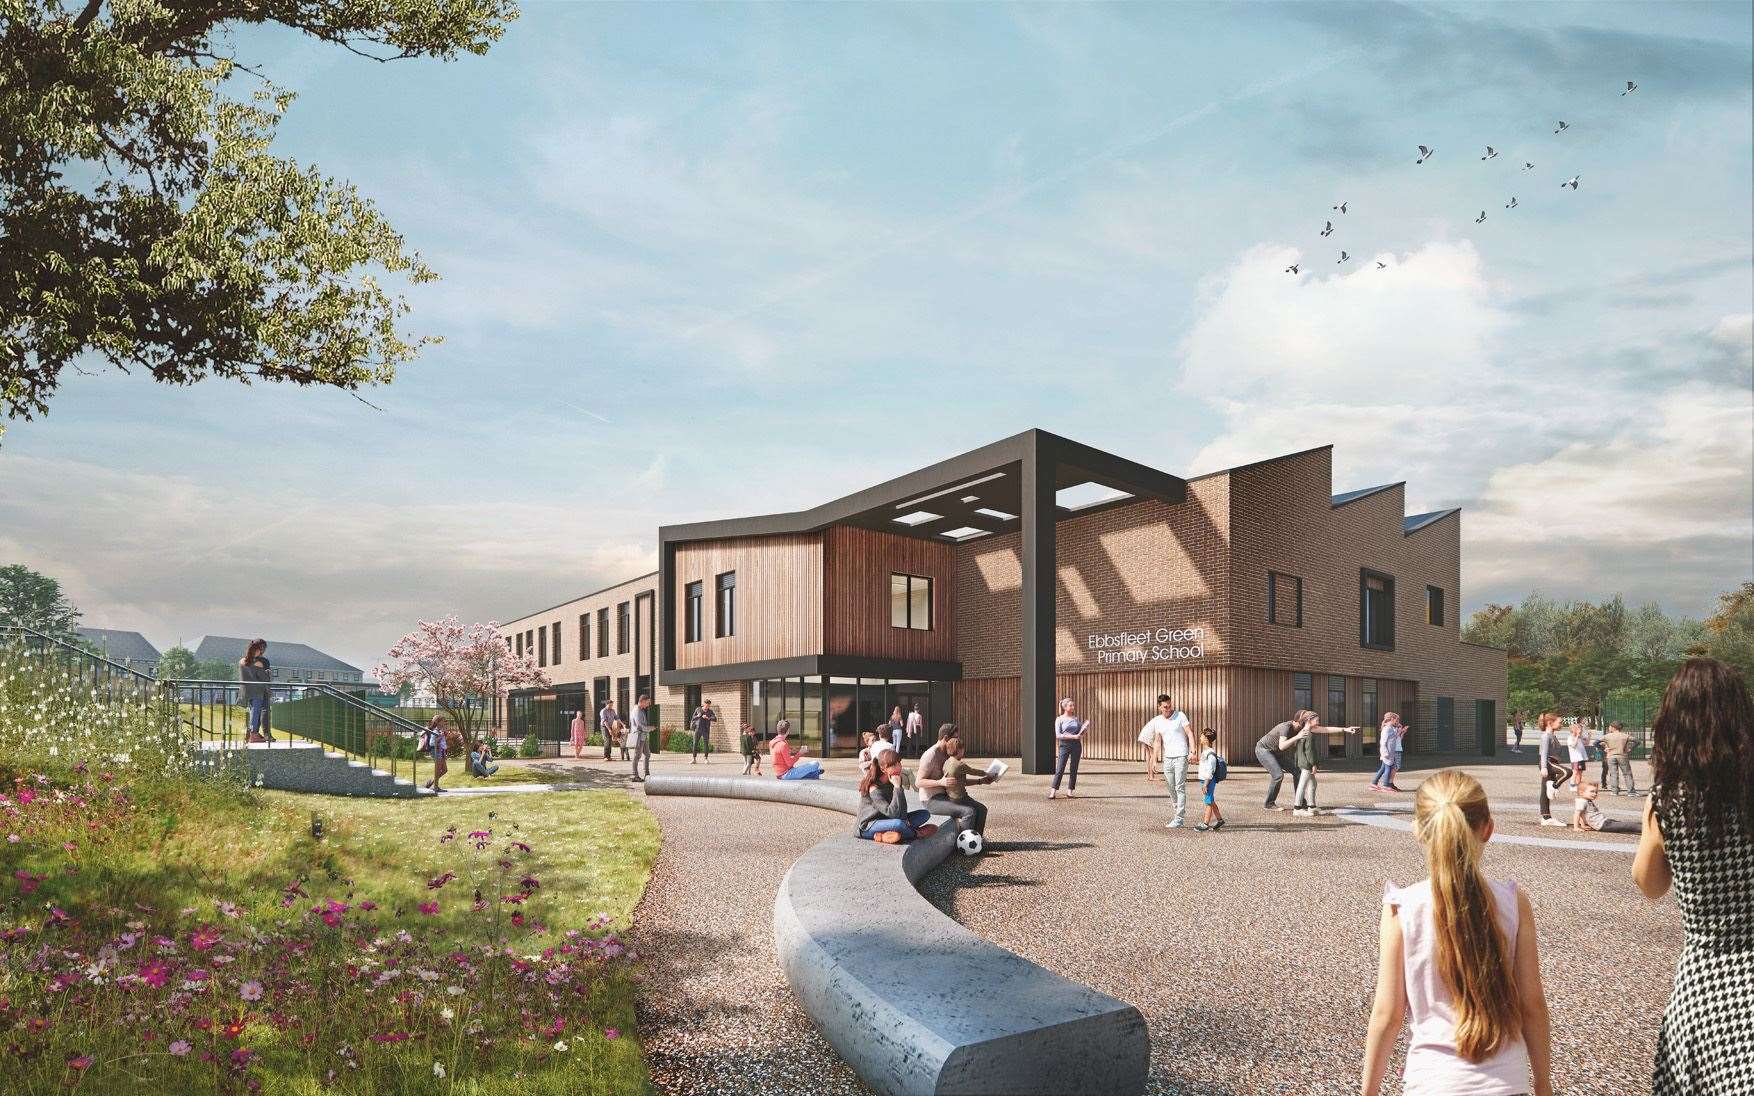 An artist's impression of the newly approved school